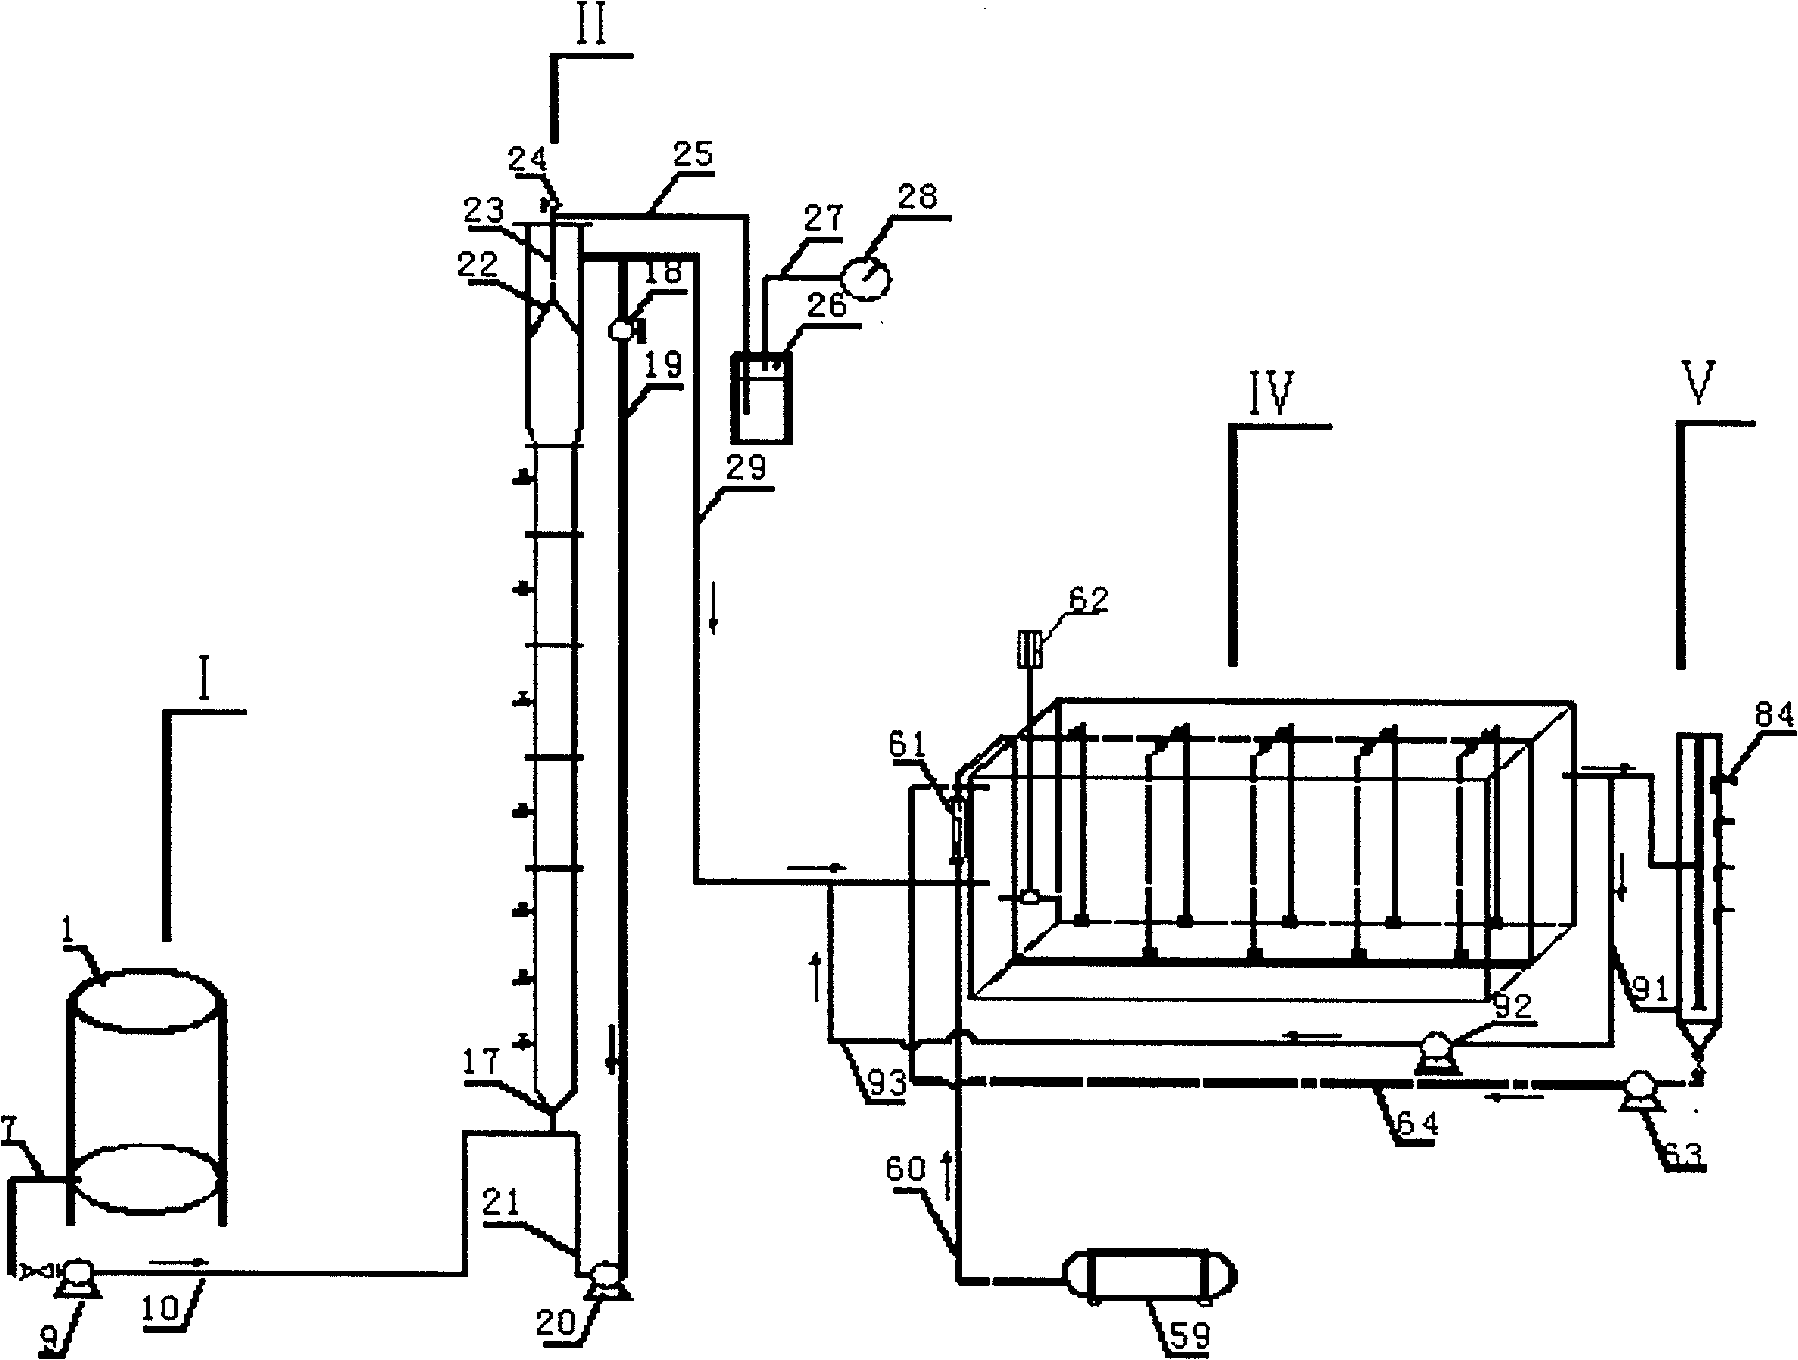 Apparatus and method of treating city domestic refuse percolation liquid by two-stage UASB+A/O technique